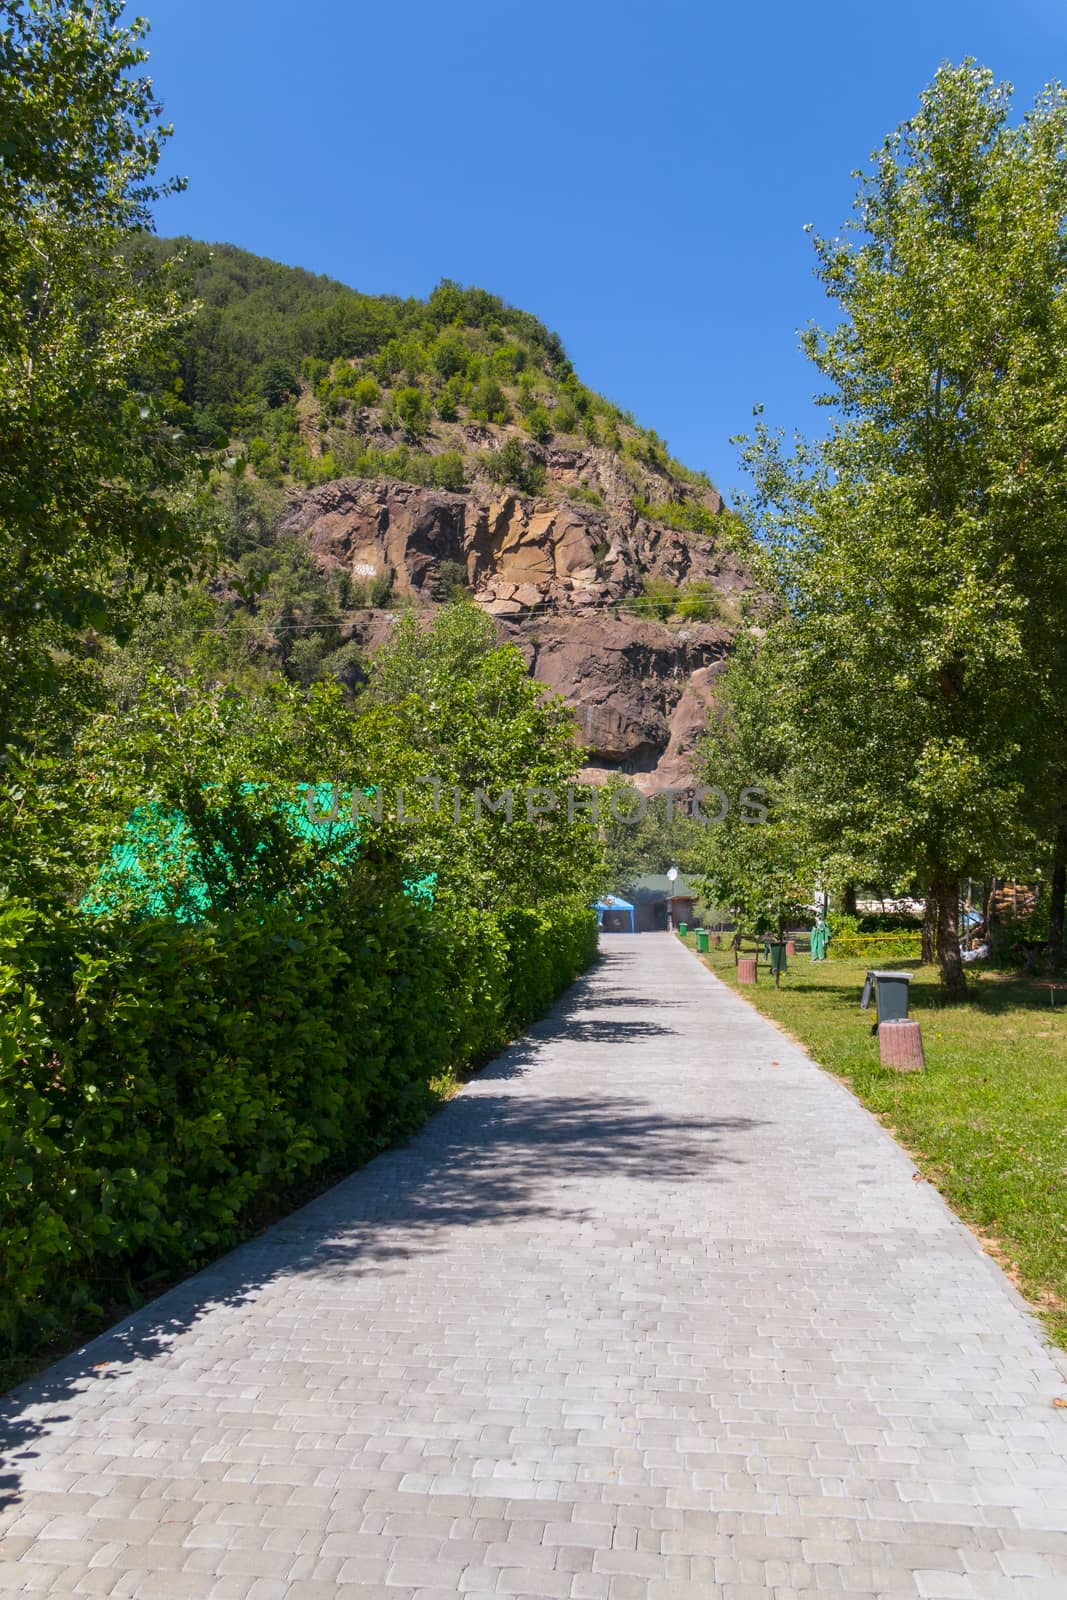 a path in the park among green plants leading to a stony slope standing in the distance by Adamchuk